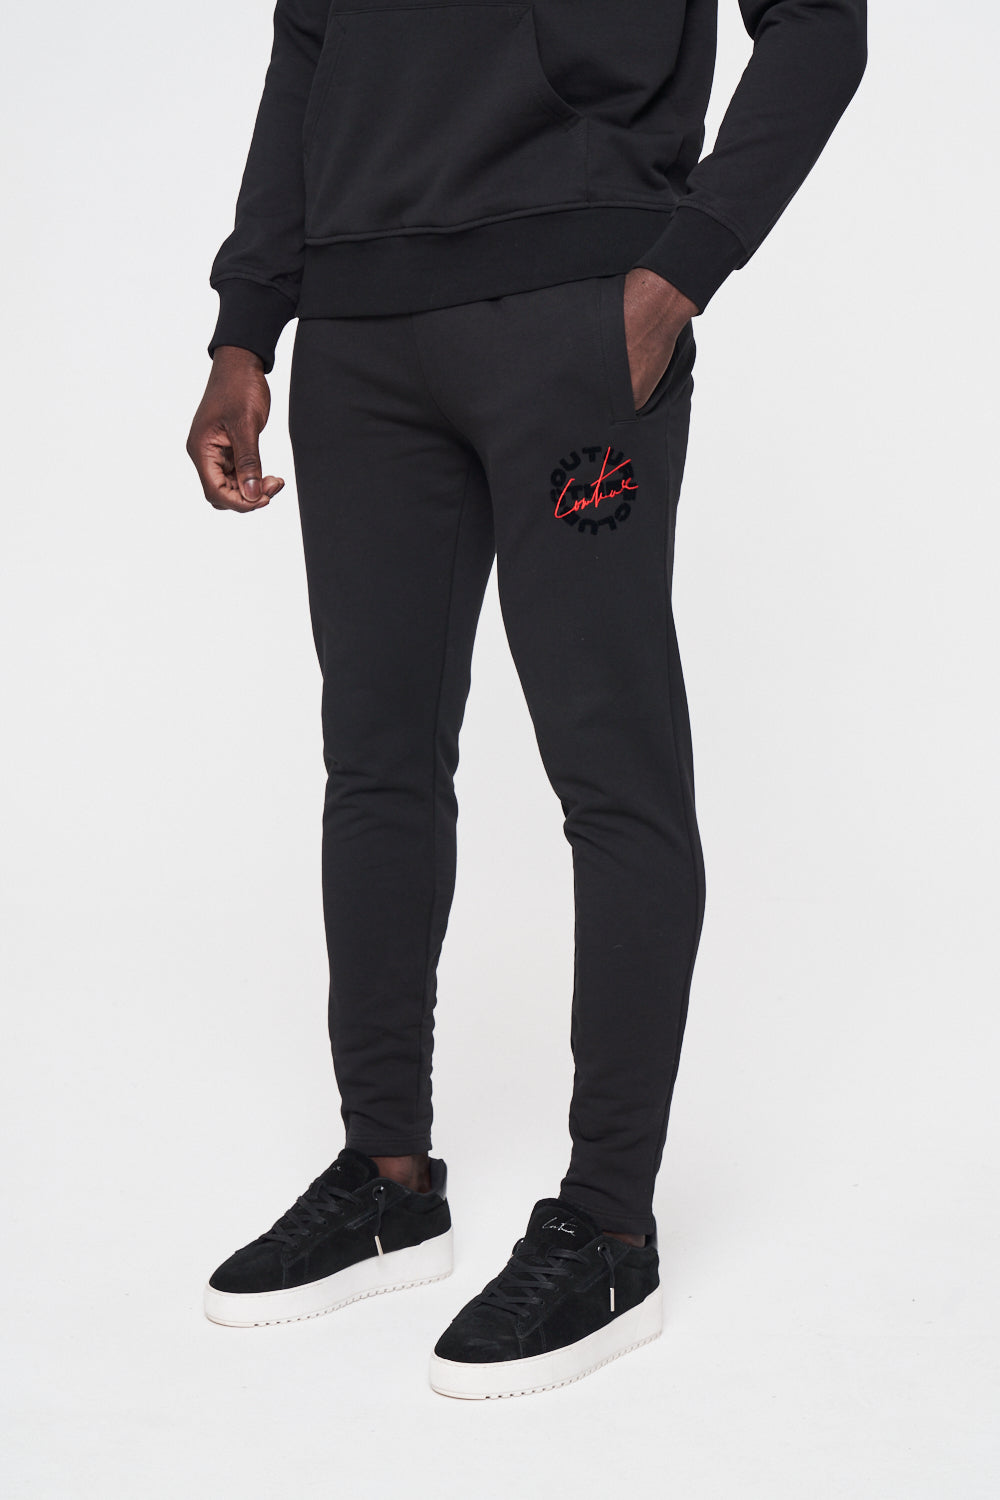 The Couture Club Slim Fit Joggers